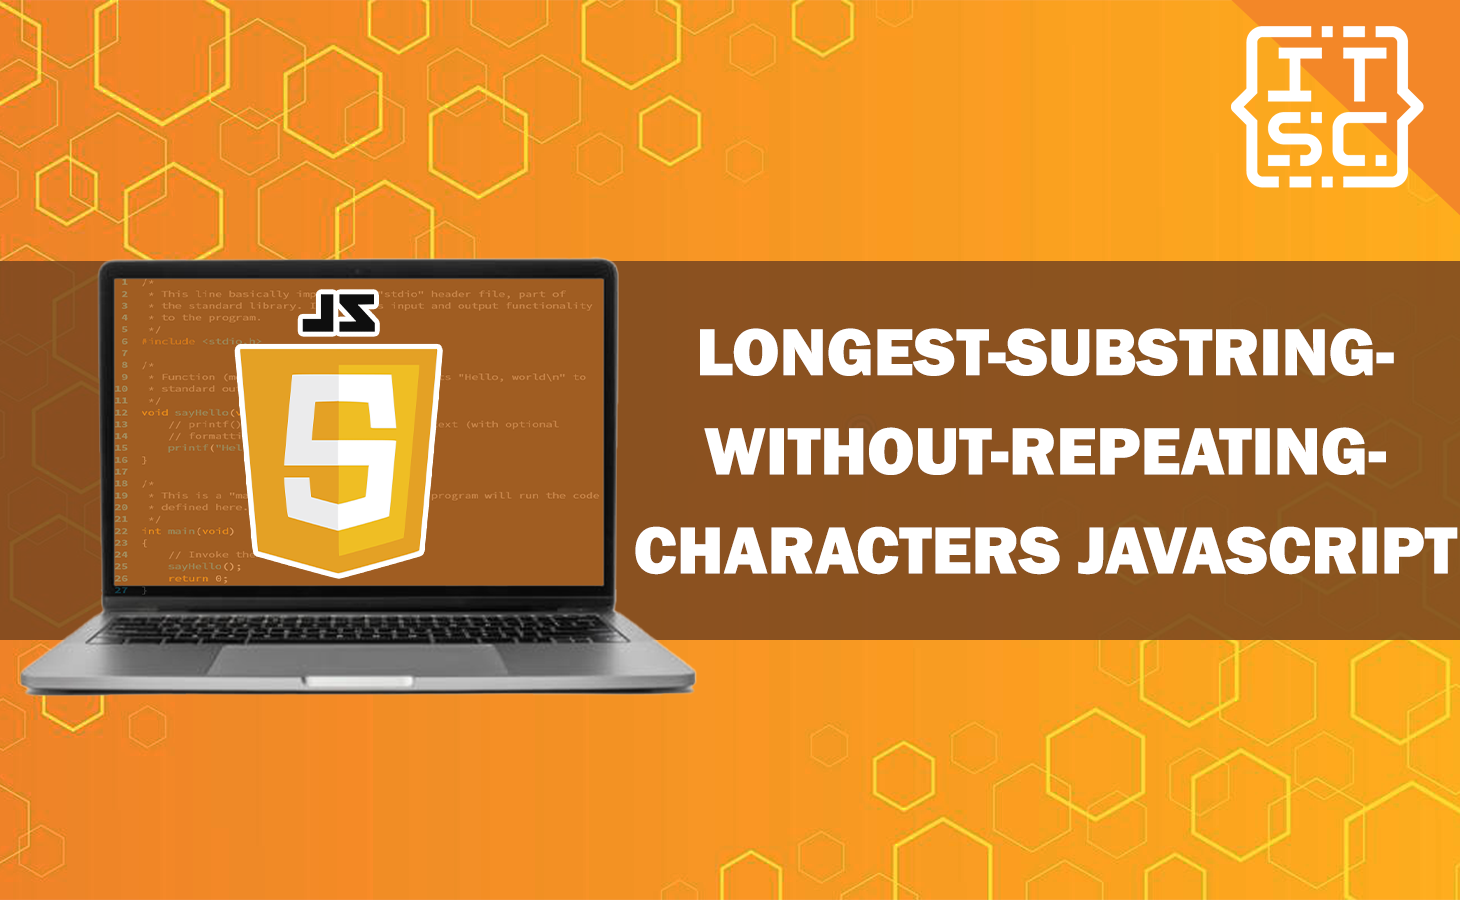 Longest-substring-without-repeating-characters JavaScript